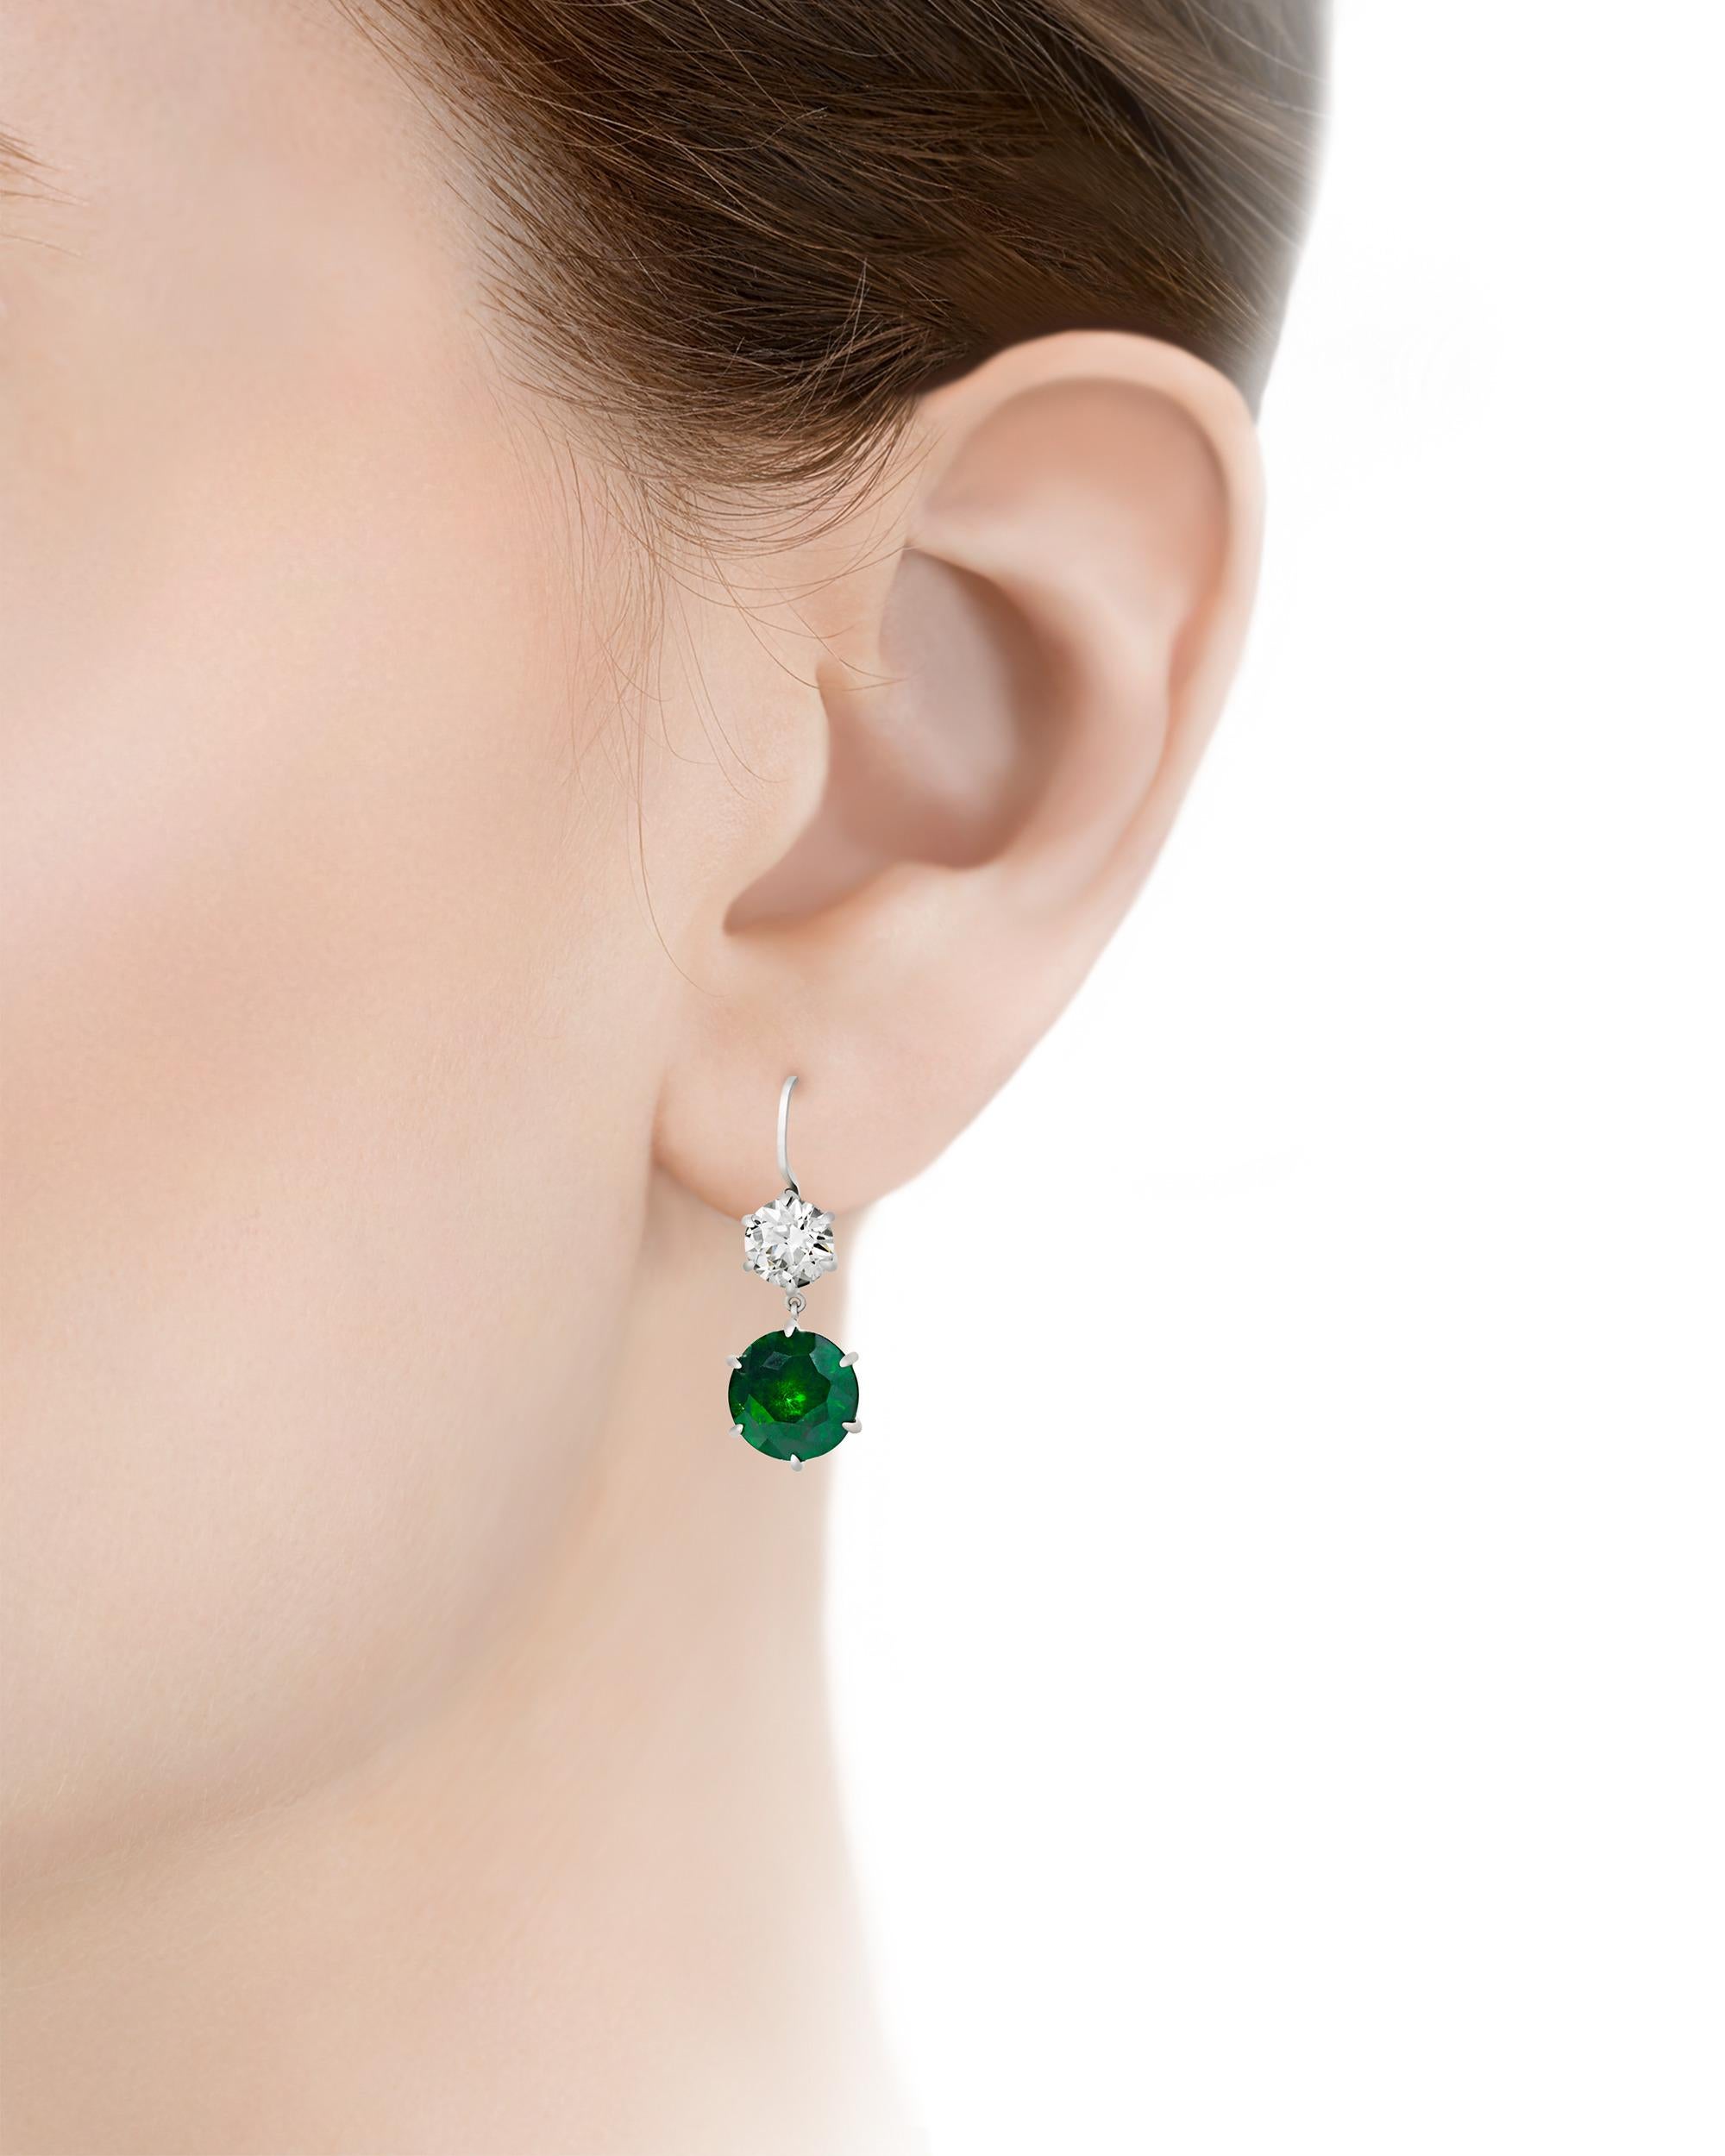 how to display earrings for sale